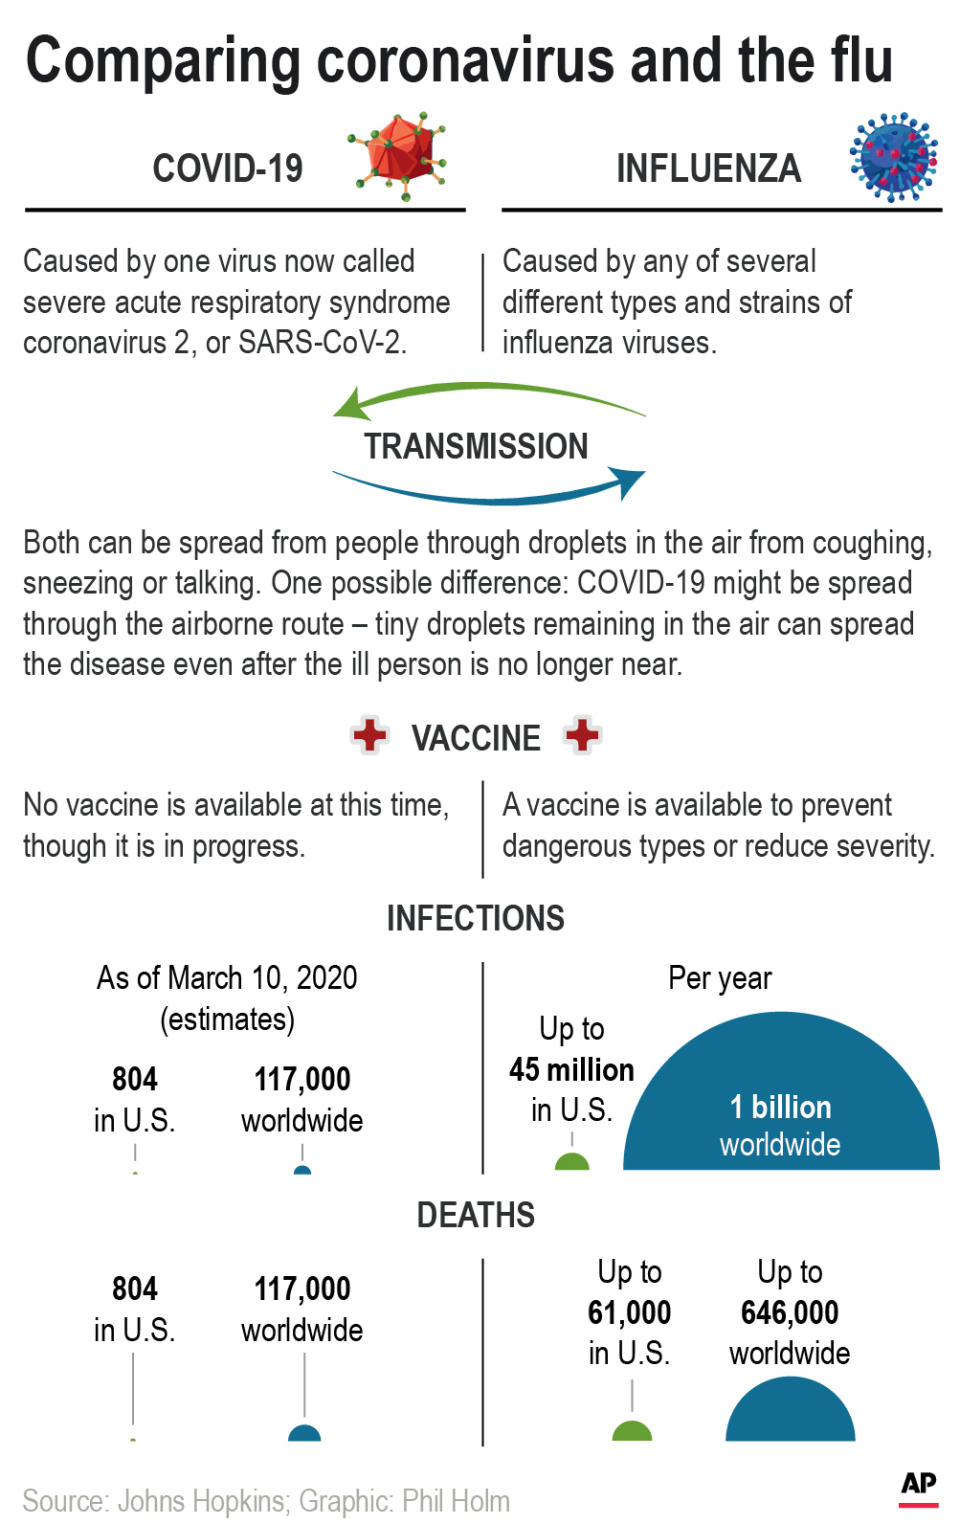 Graphic compares causes, transmission, vaccines, infections and deaths between influenza and Covid-19; 2c x 5 1/4 inches; 96.3 mm x 133 mm;